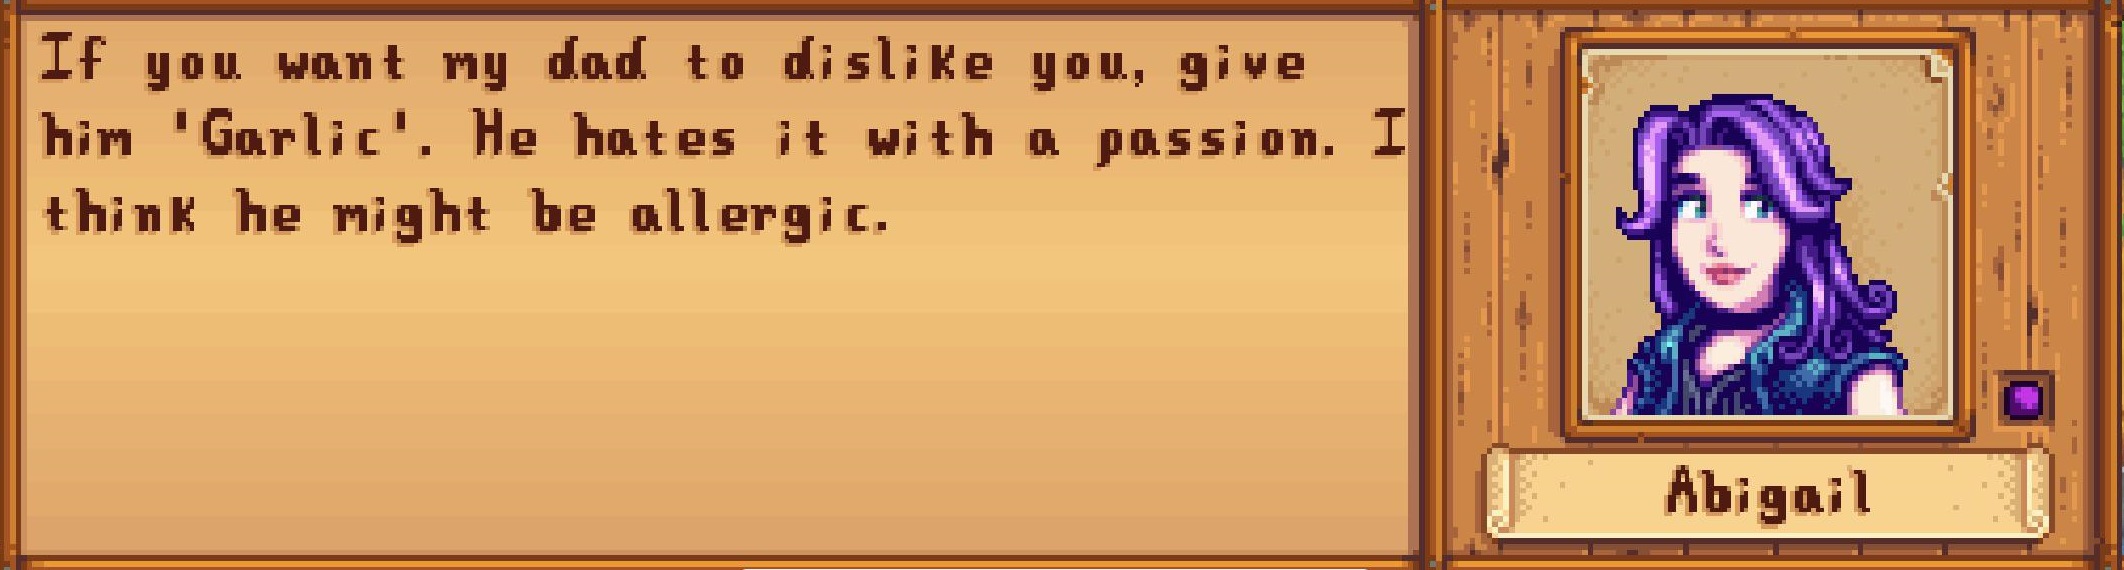 Stardew Valley The Sorcerer's Daughter Story Guide - Dialogues Bundle - 0519069